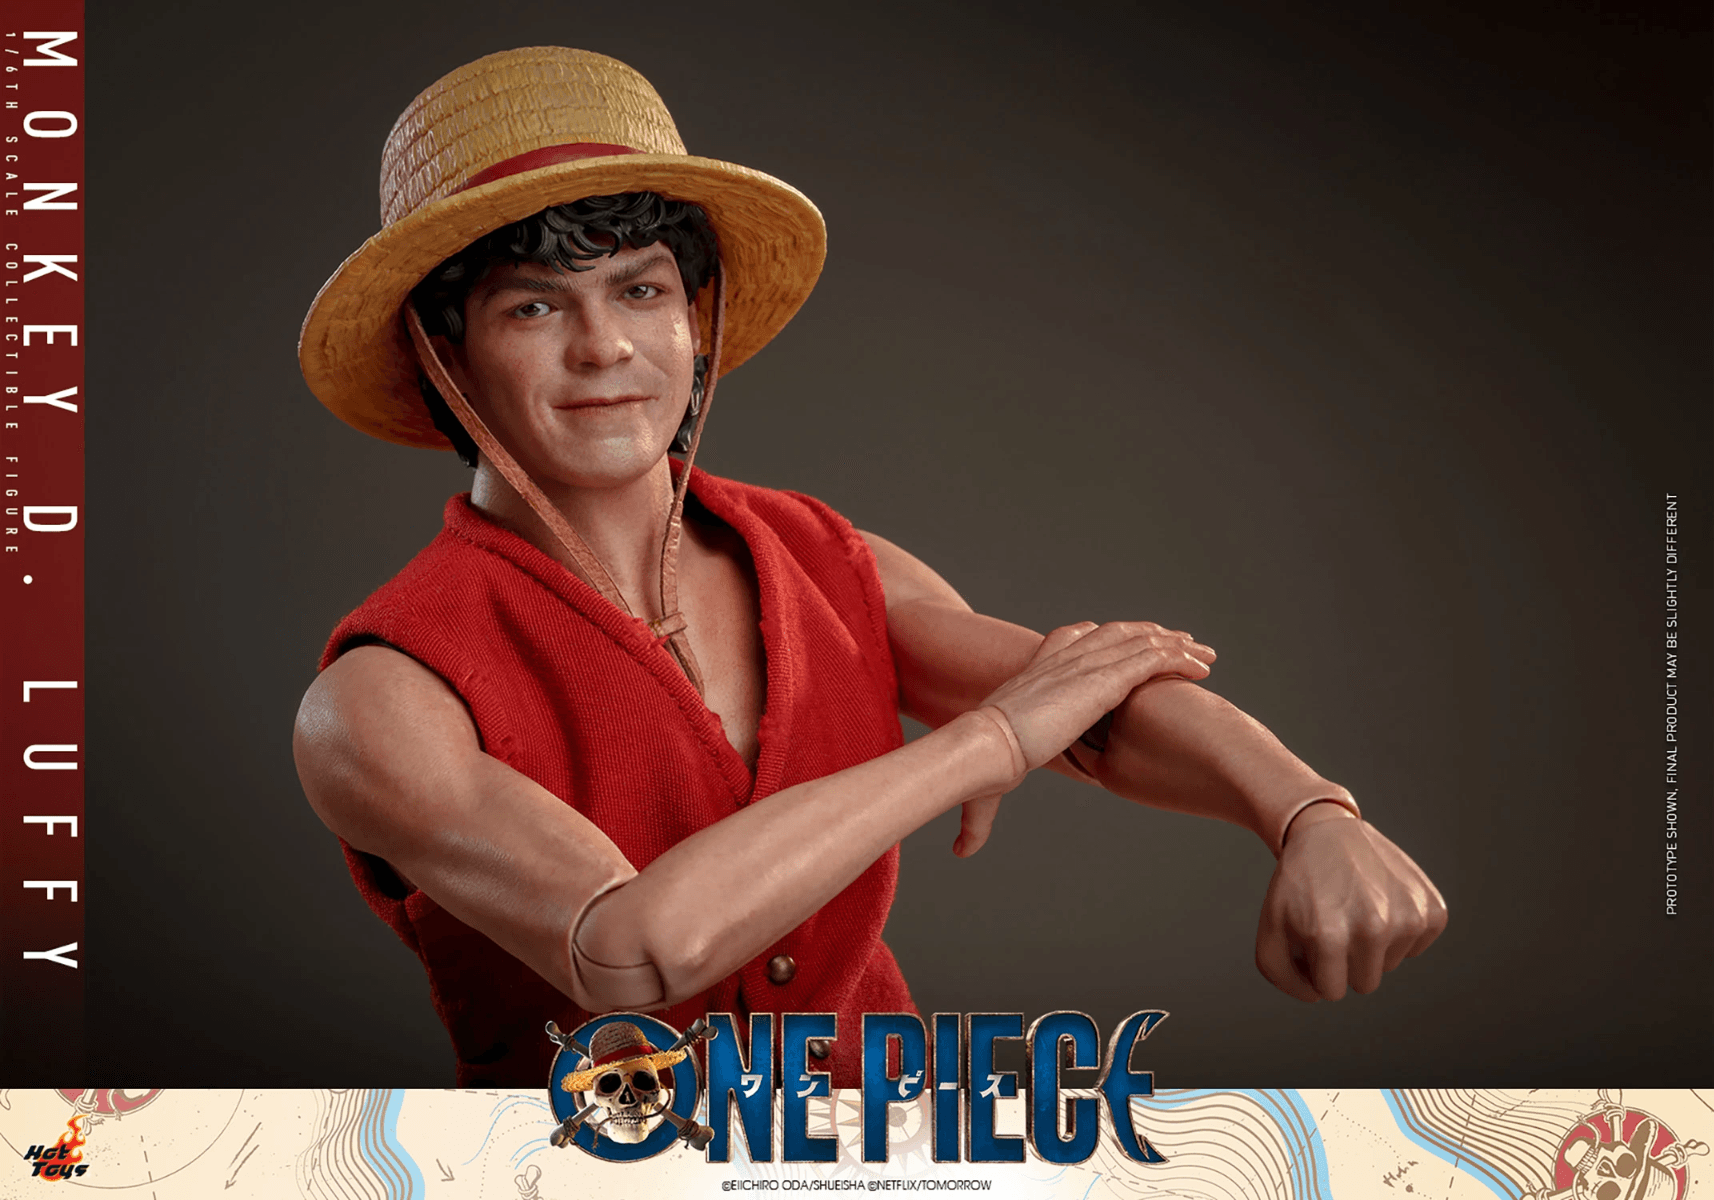 HOTTMS109 One Piece (2023) - Monkey D. Luffy 1:6 Scale Collectable Action Figure - Hot Toys - Titan Pop Culture